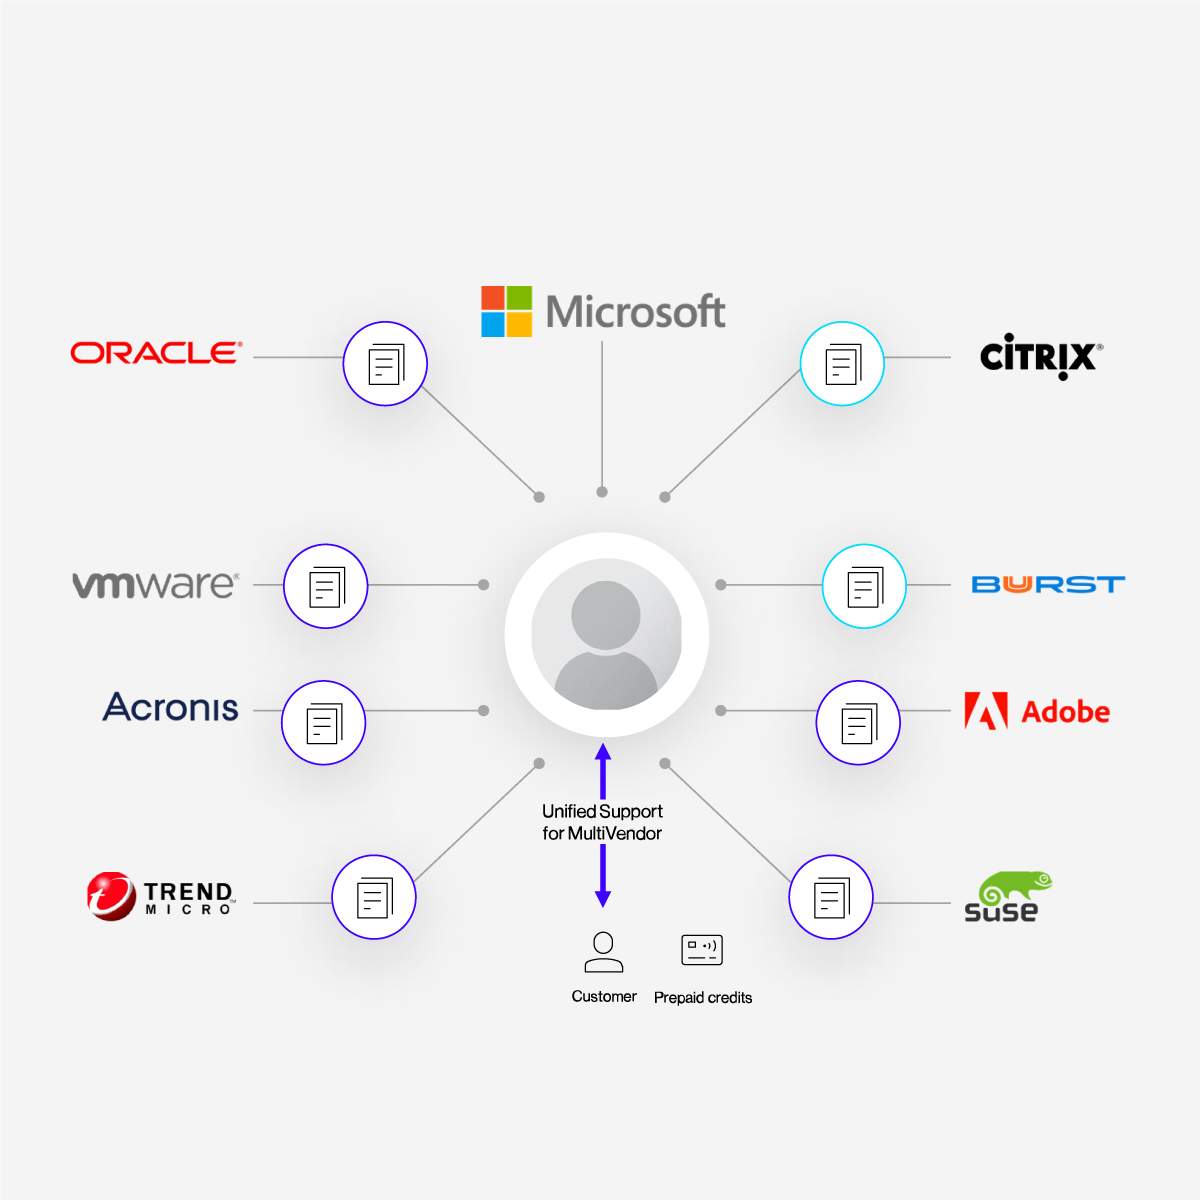 A diagram showing a network of microsoft products.